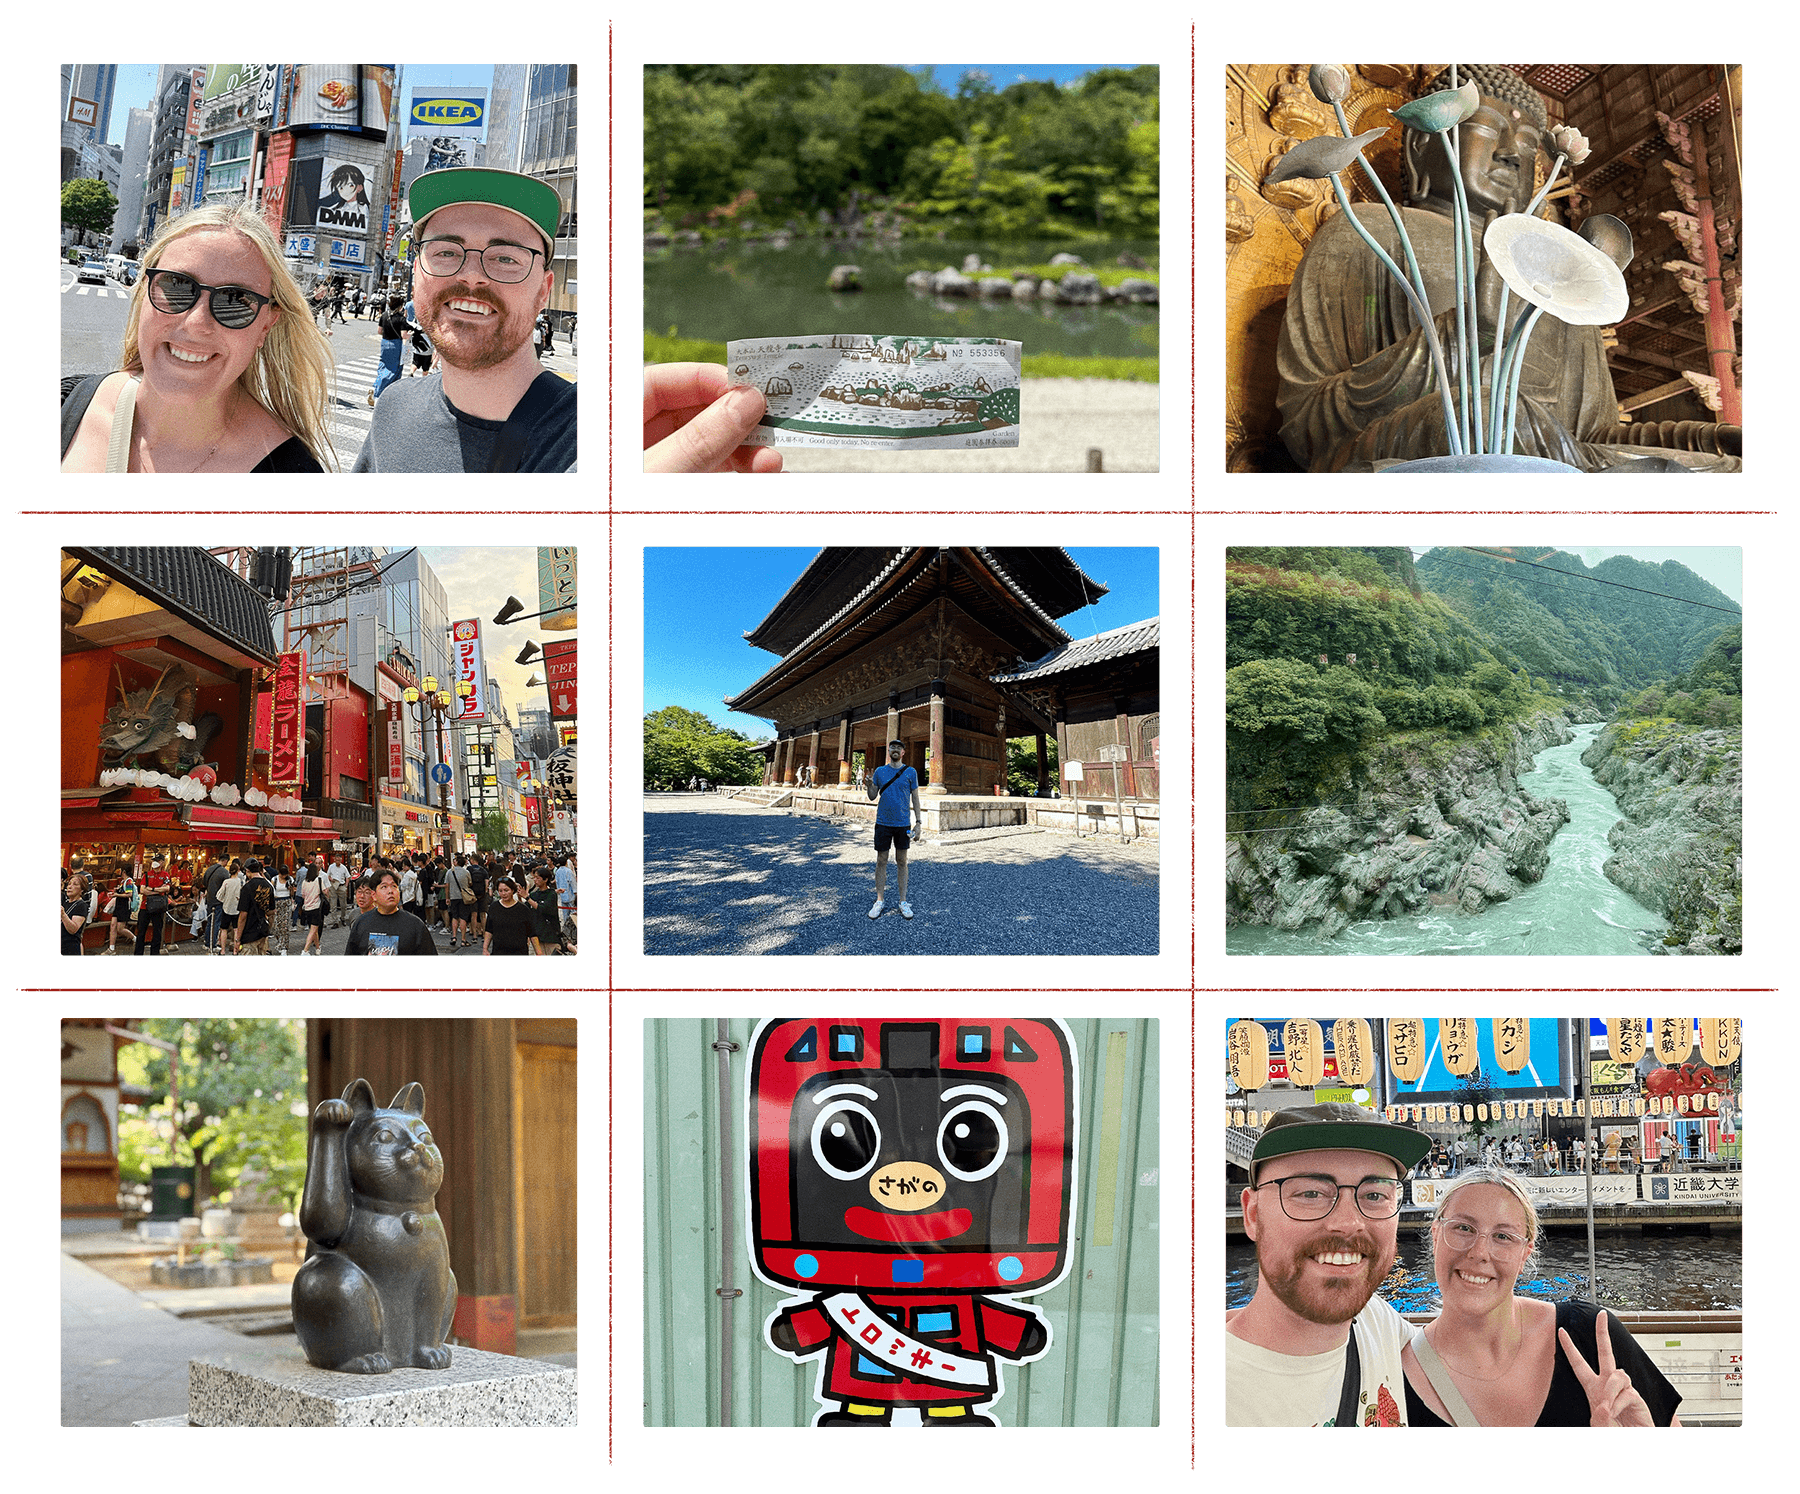 Photo grid of Parker's travels in Japan including a selfie at Shibuya Crossing, nature photos, city photos, the Buddha statue at Todai-Ji, the waving cat statue at Gotokuji Temple, a street art kawaii character, and a selfie at the Glico running man sign in Osaka.